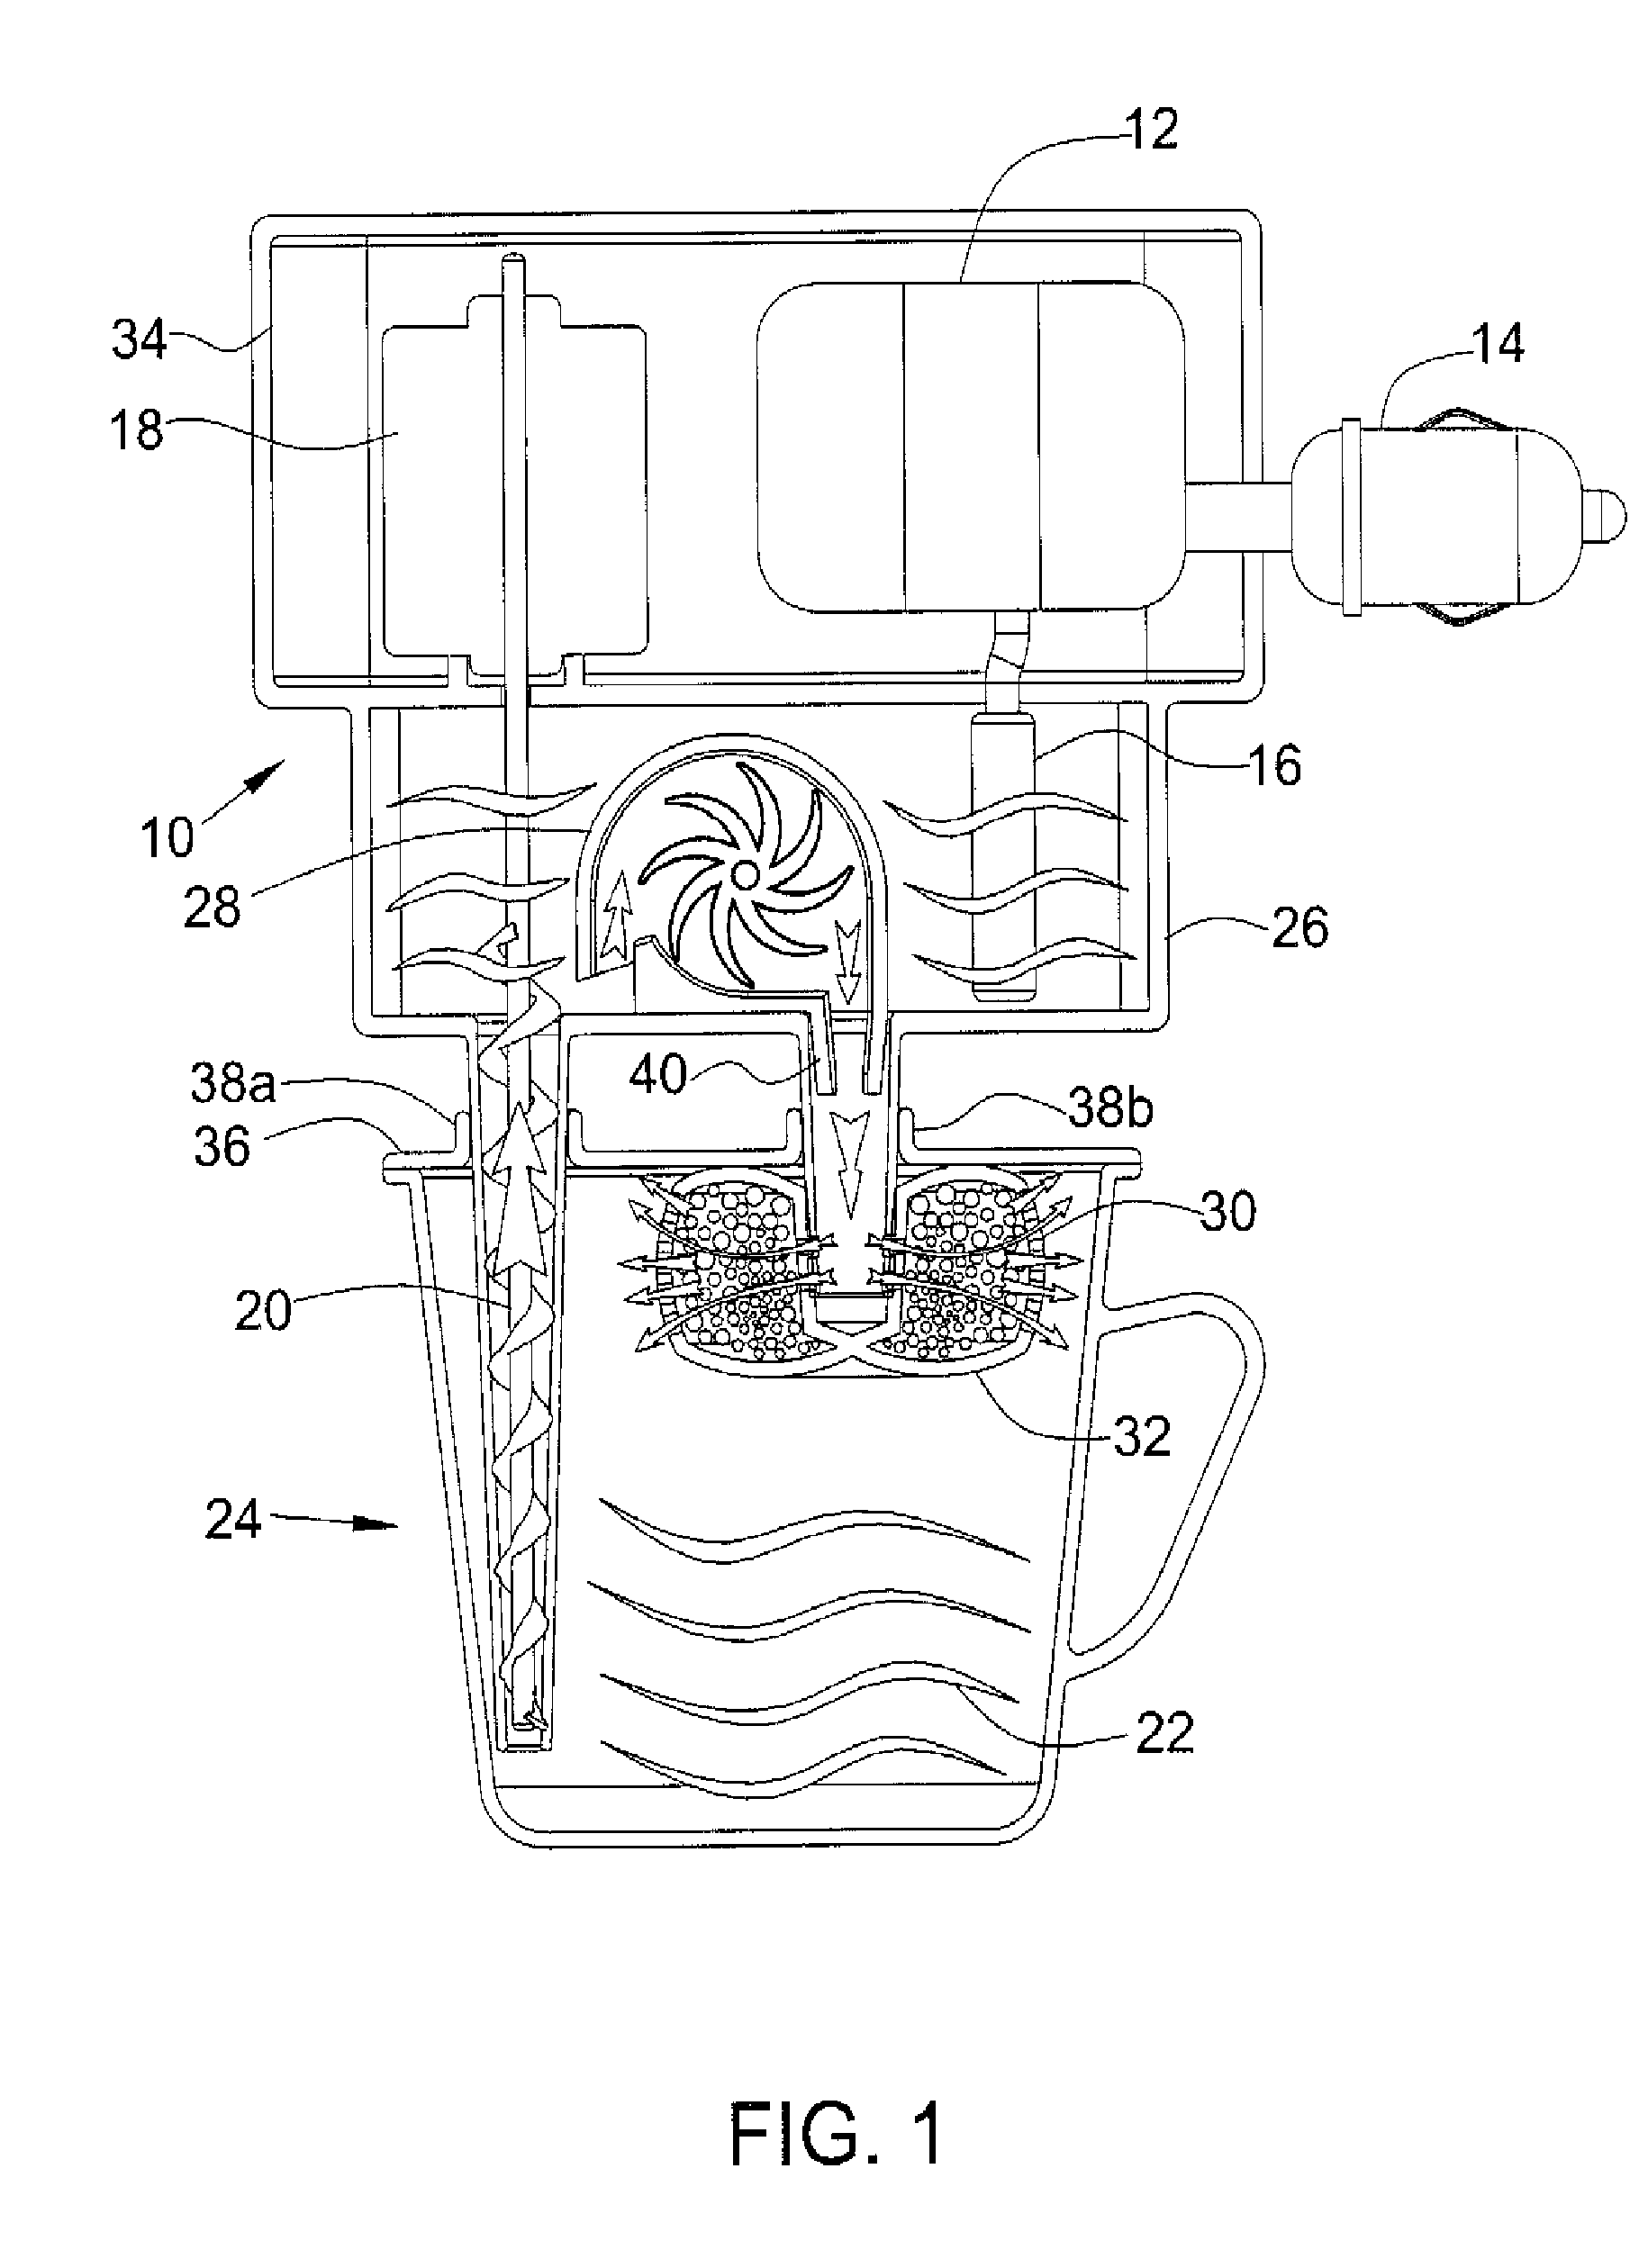 Brewing element with a central inlet